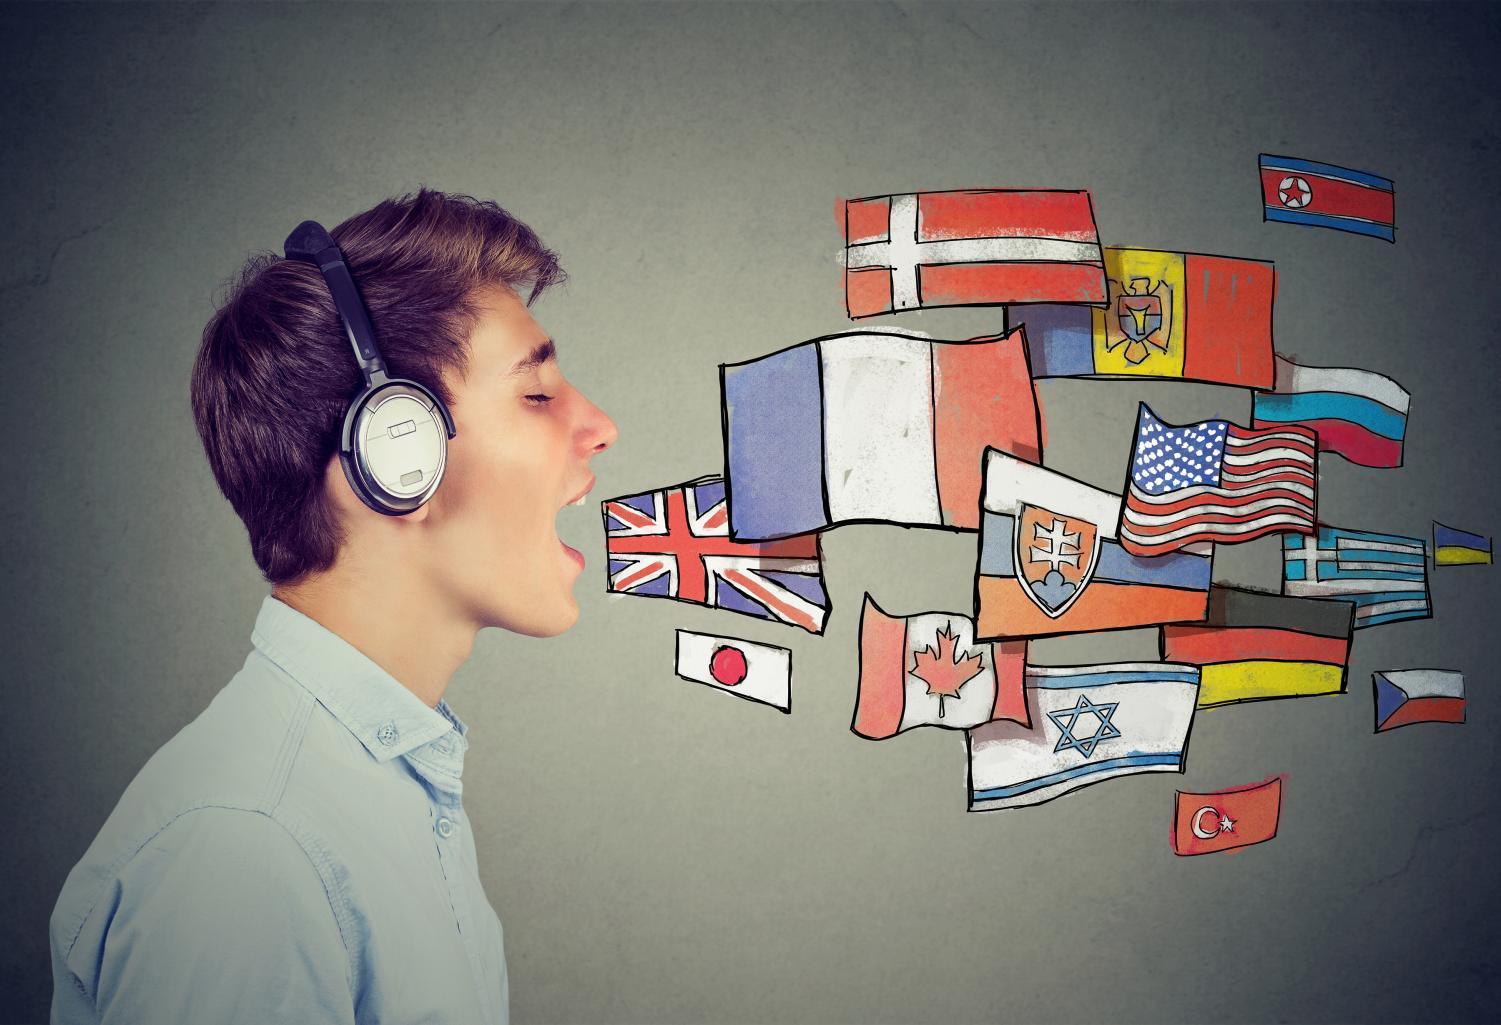 Why is learning a second language important?